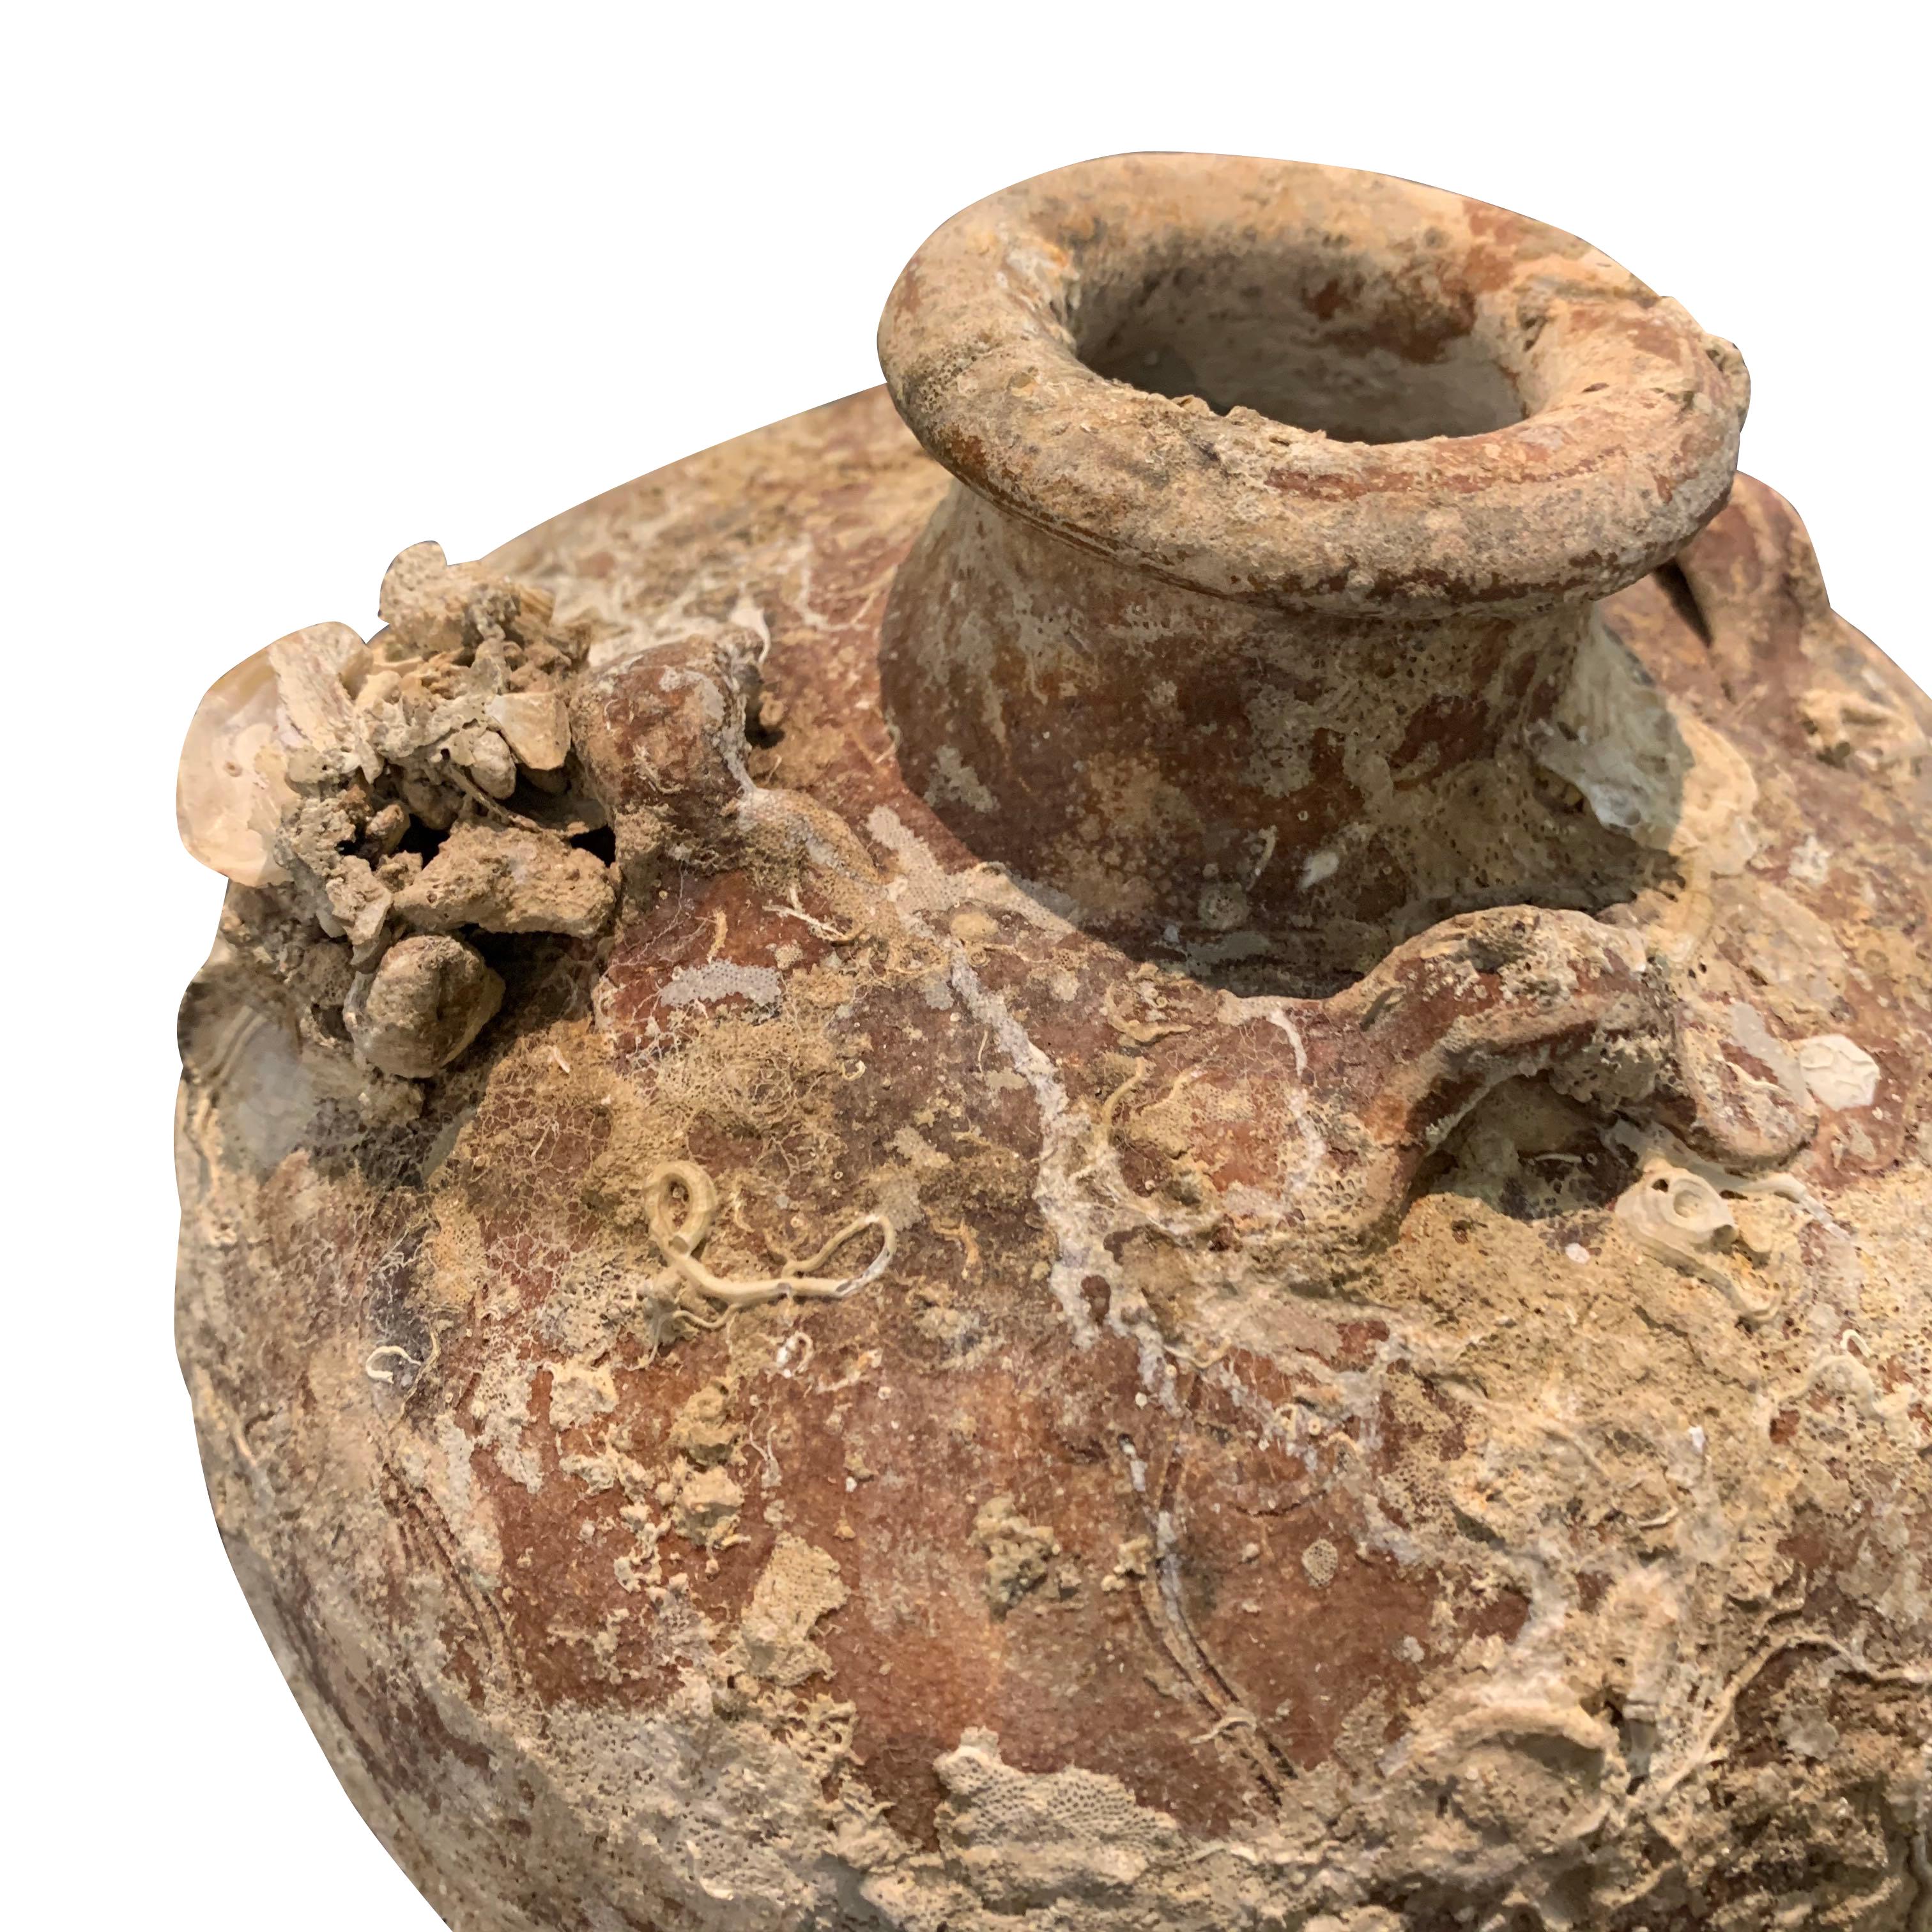 15th century Vietnamese shipwrecked four handled vase.
The rust colored terracotta base is covered in barnacles giving the vase an interesting texture.
The vase is in excellent condition for it's age.
We have a large collection of 15th and 16th